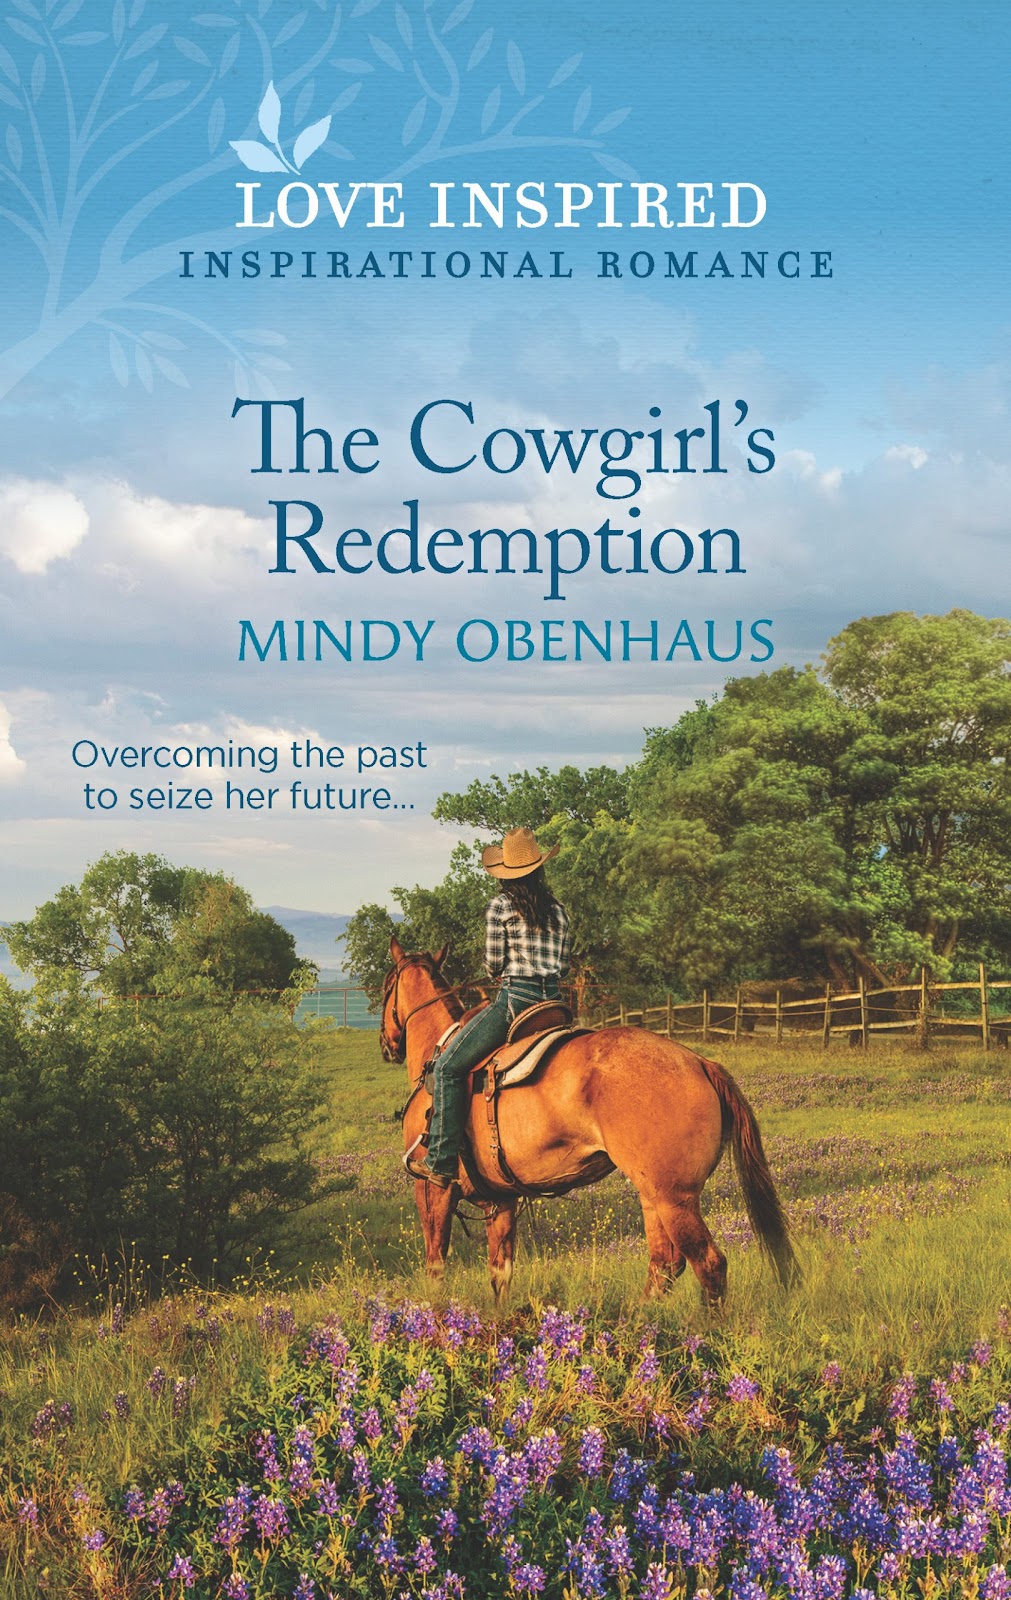 The Cowgirl's Redemption